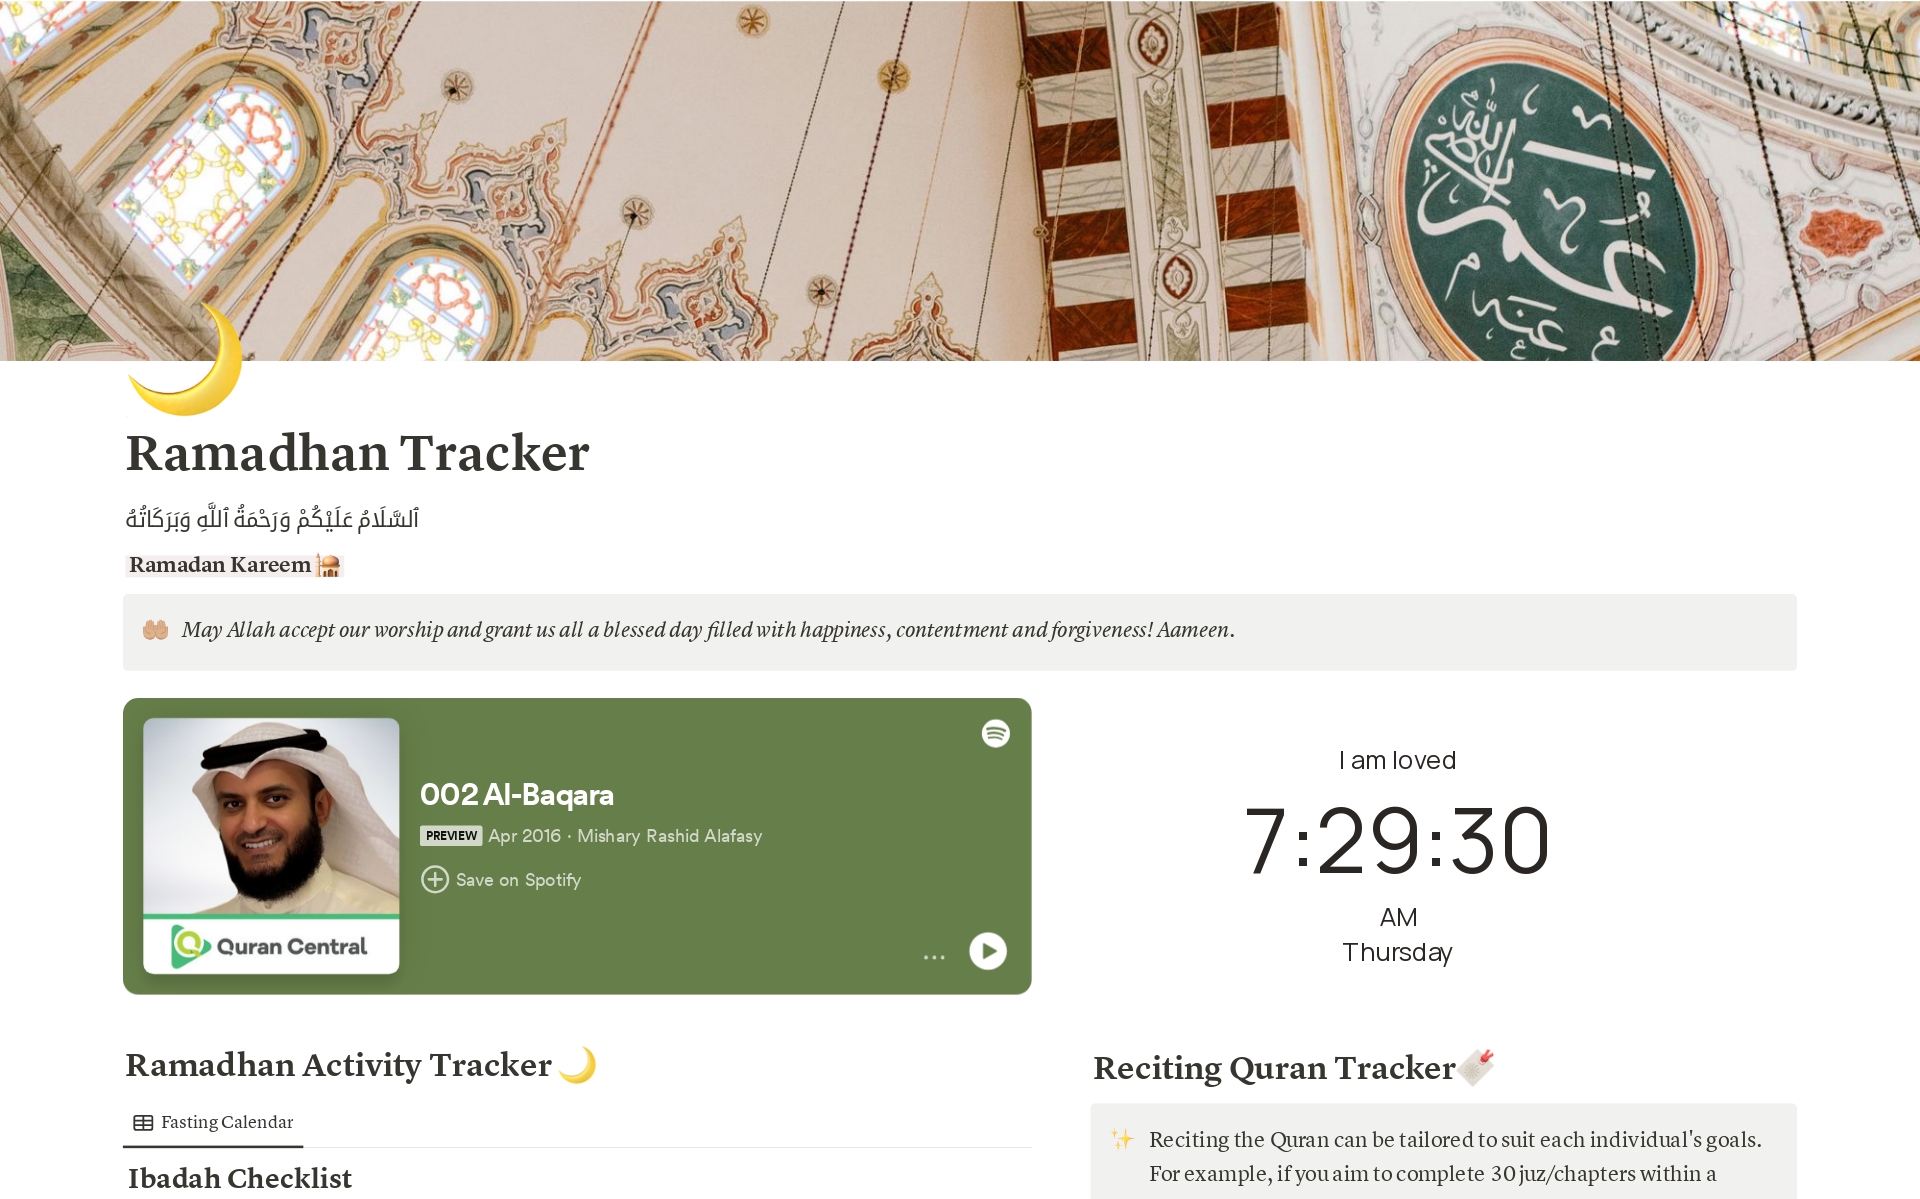 Stay organized and spiritually enriched throughout the holy month with our Ramadan Activity Tracker. Monitor your daily prayers, Quran recitations, charitable acts, and fasting progress effortlessly. Easily track your spiritual goals and achievements, ensuring a fulfilling and me